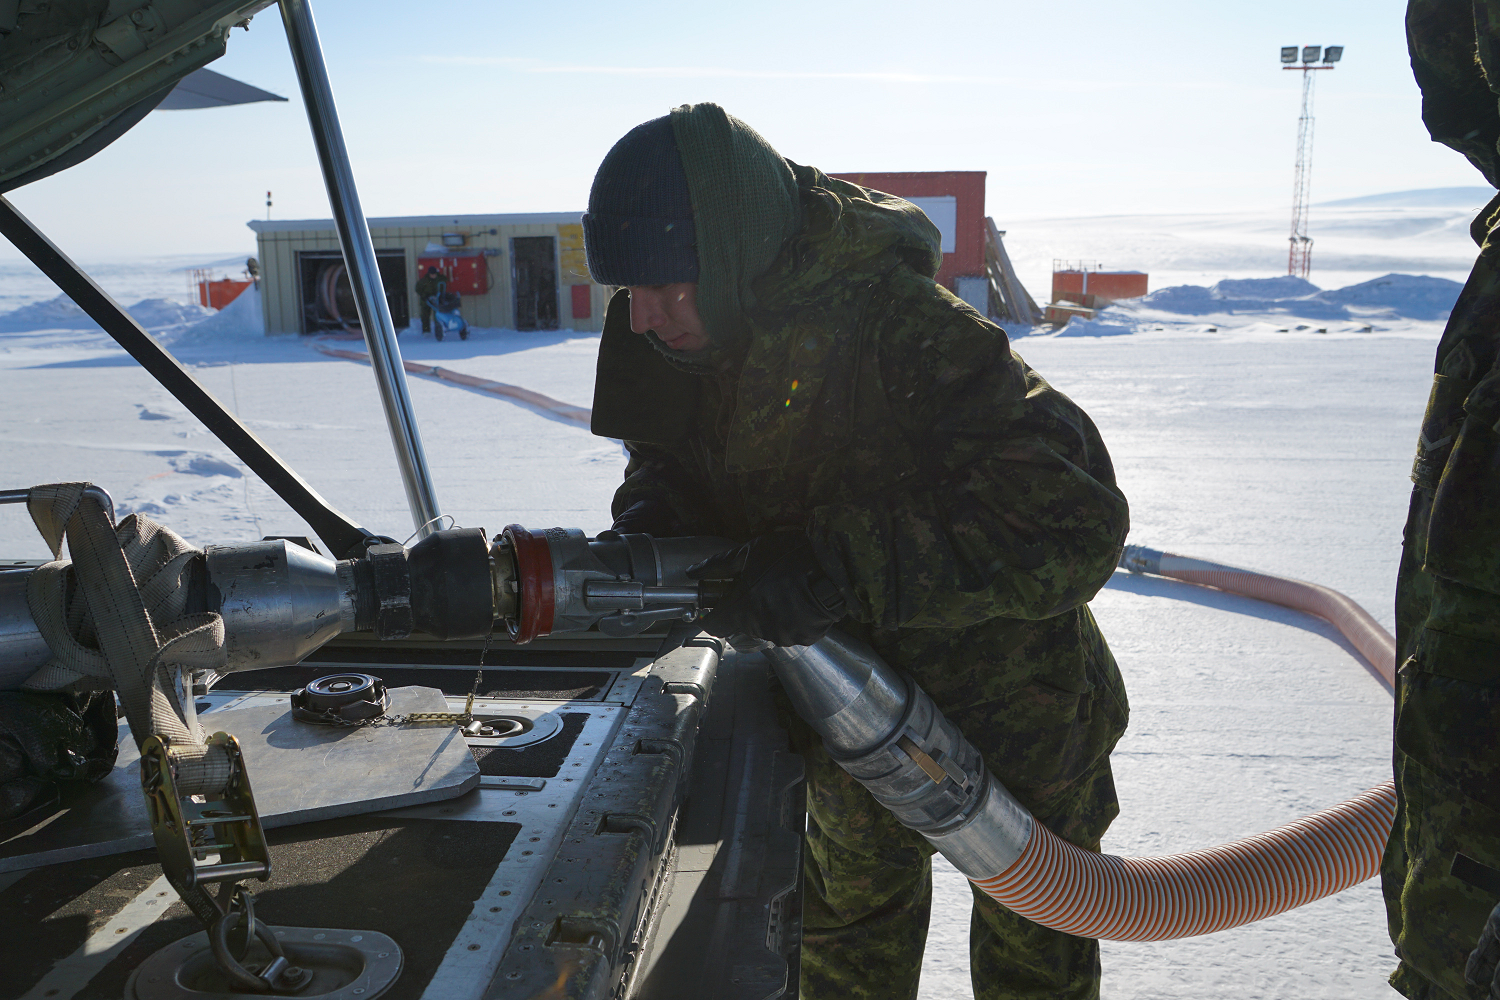 April 21, 2015. MCpl Frank Charest from CFB Comox and Pte Mathew Lloyd of CFB Greenwood ensure that the fuel hoses are safely connected before fuel is extracted during Operation BOXTOP at Canadian Forces Station Alert, Nunavut on April 21, 2015. (Photo: Cpl Raymond Haack)